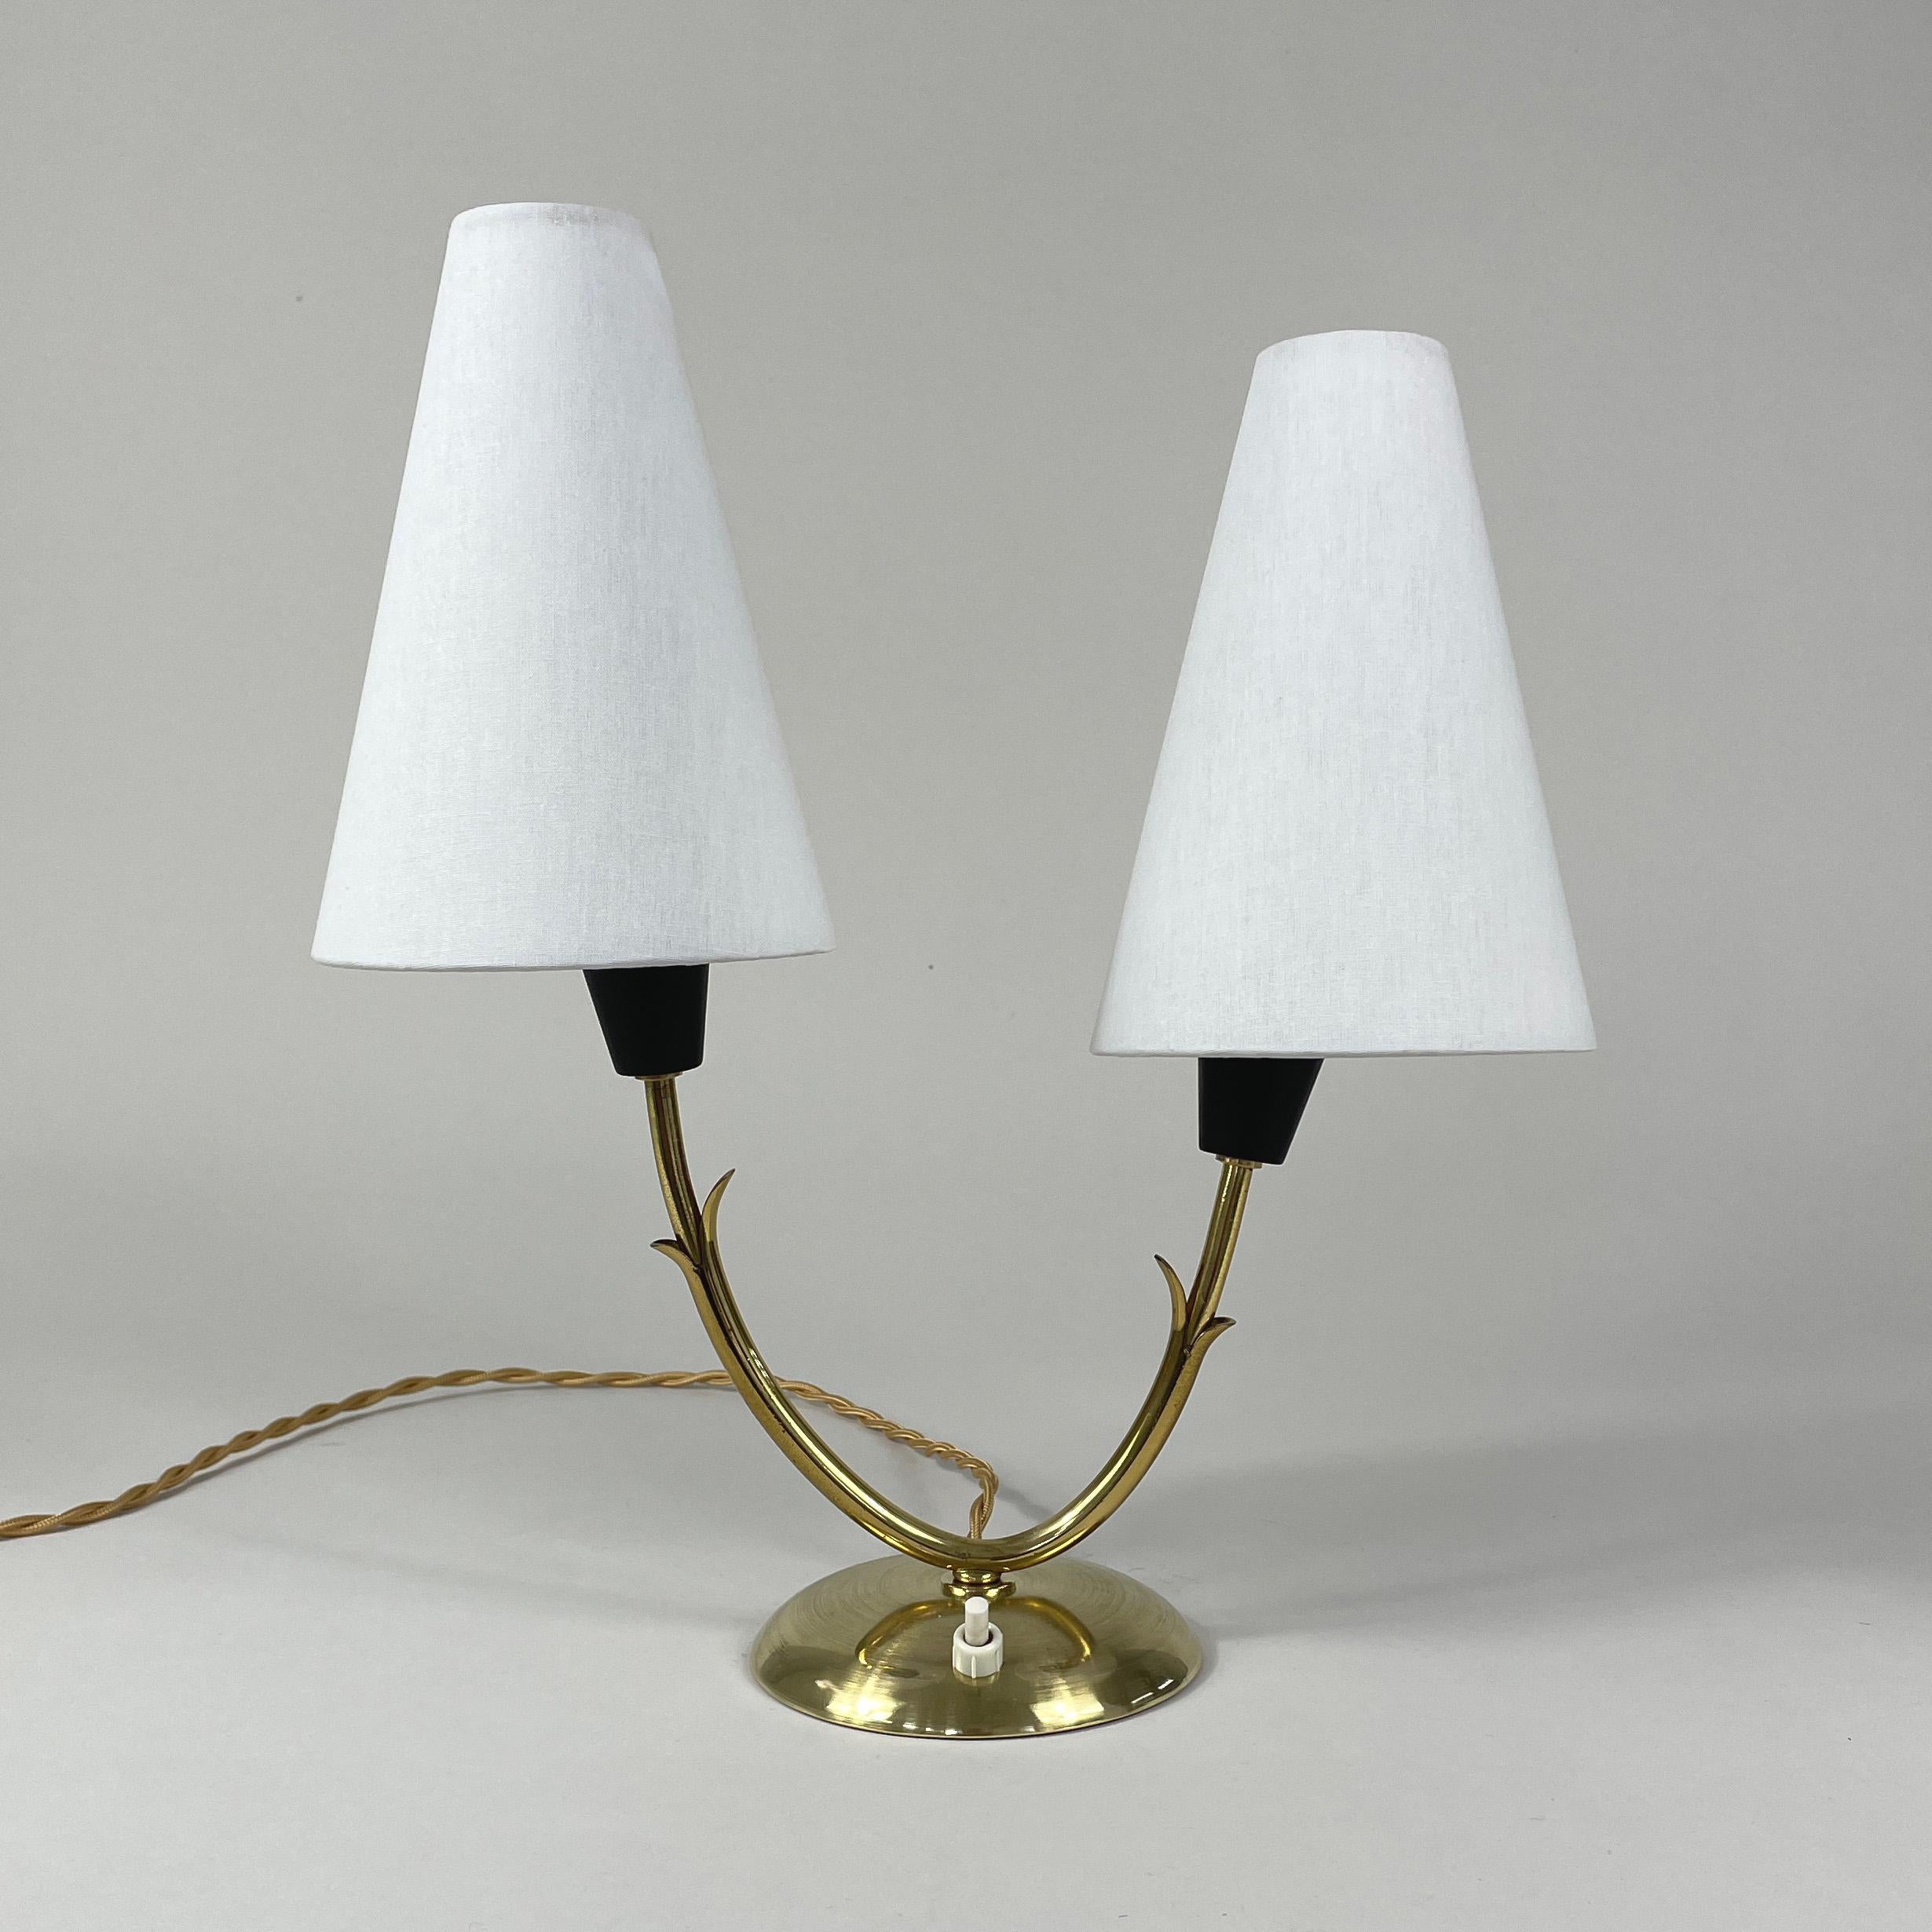 This unusual double arm table lamp was designed and manufactured in Sweden in the 1950s. It features a brass base with a clip-on off white linen lampshades. The lampshades can be moved in different directions.

Good original condition with two E14